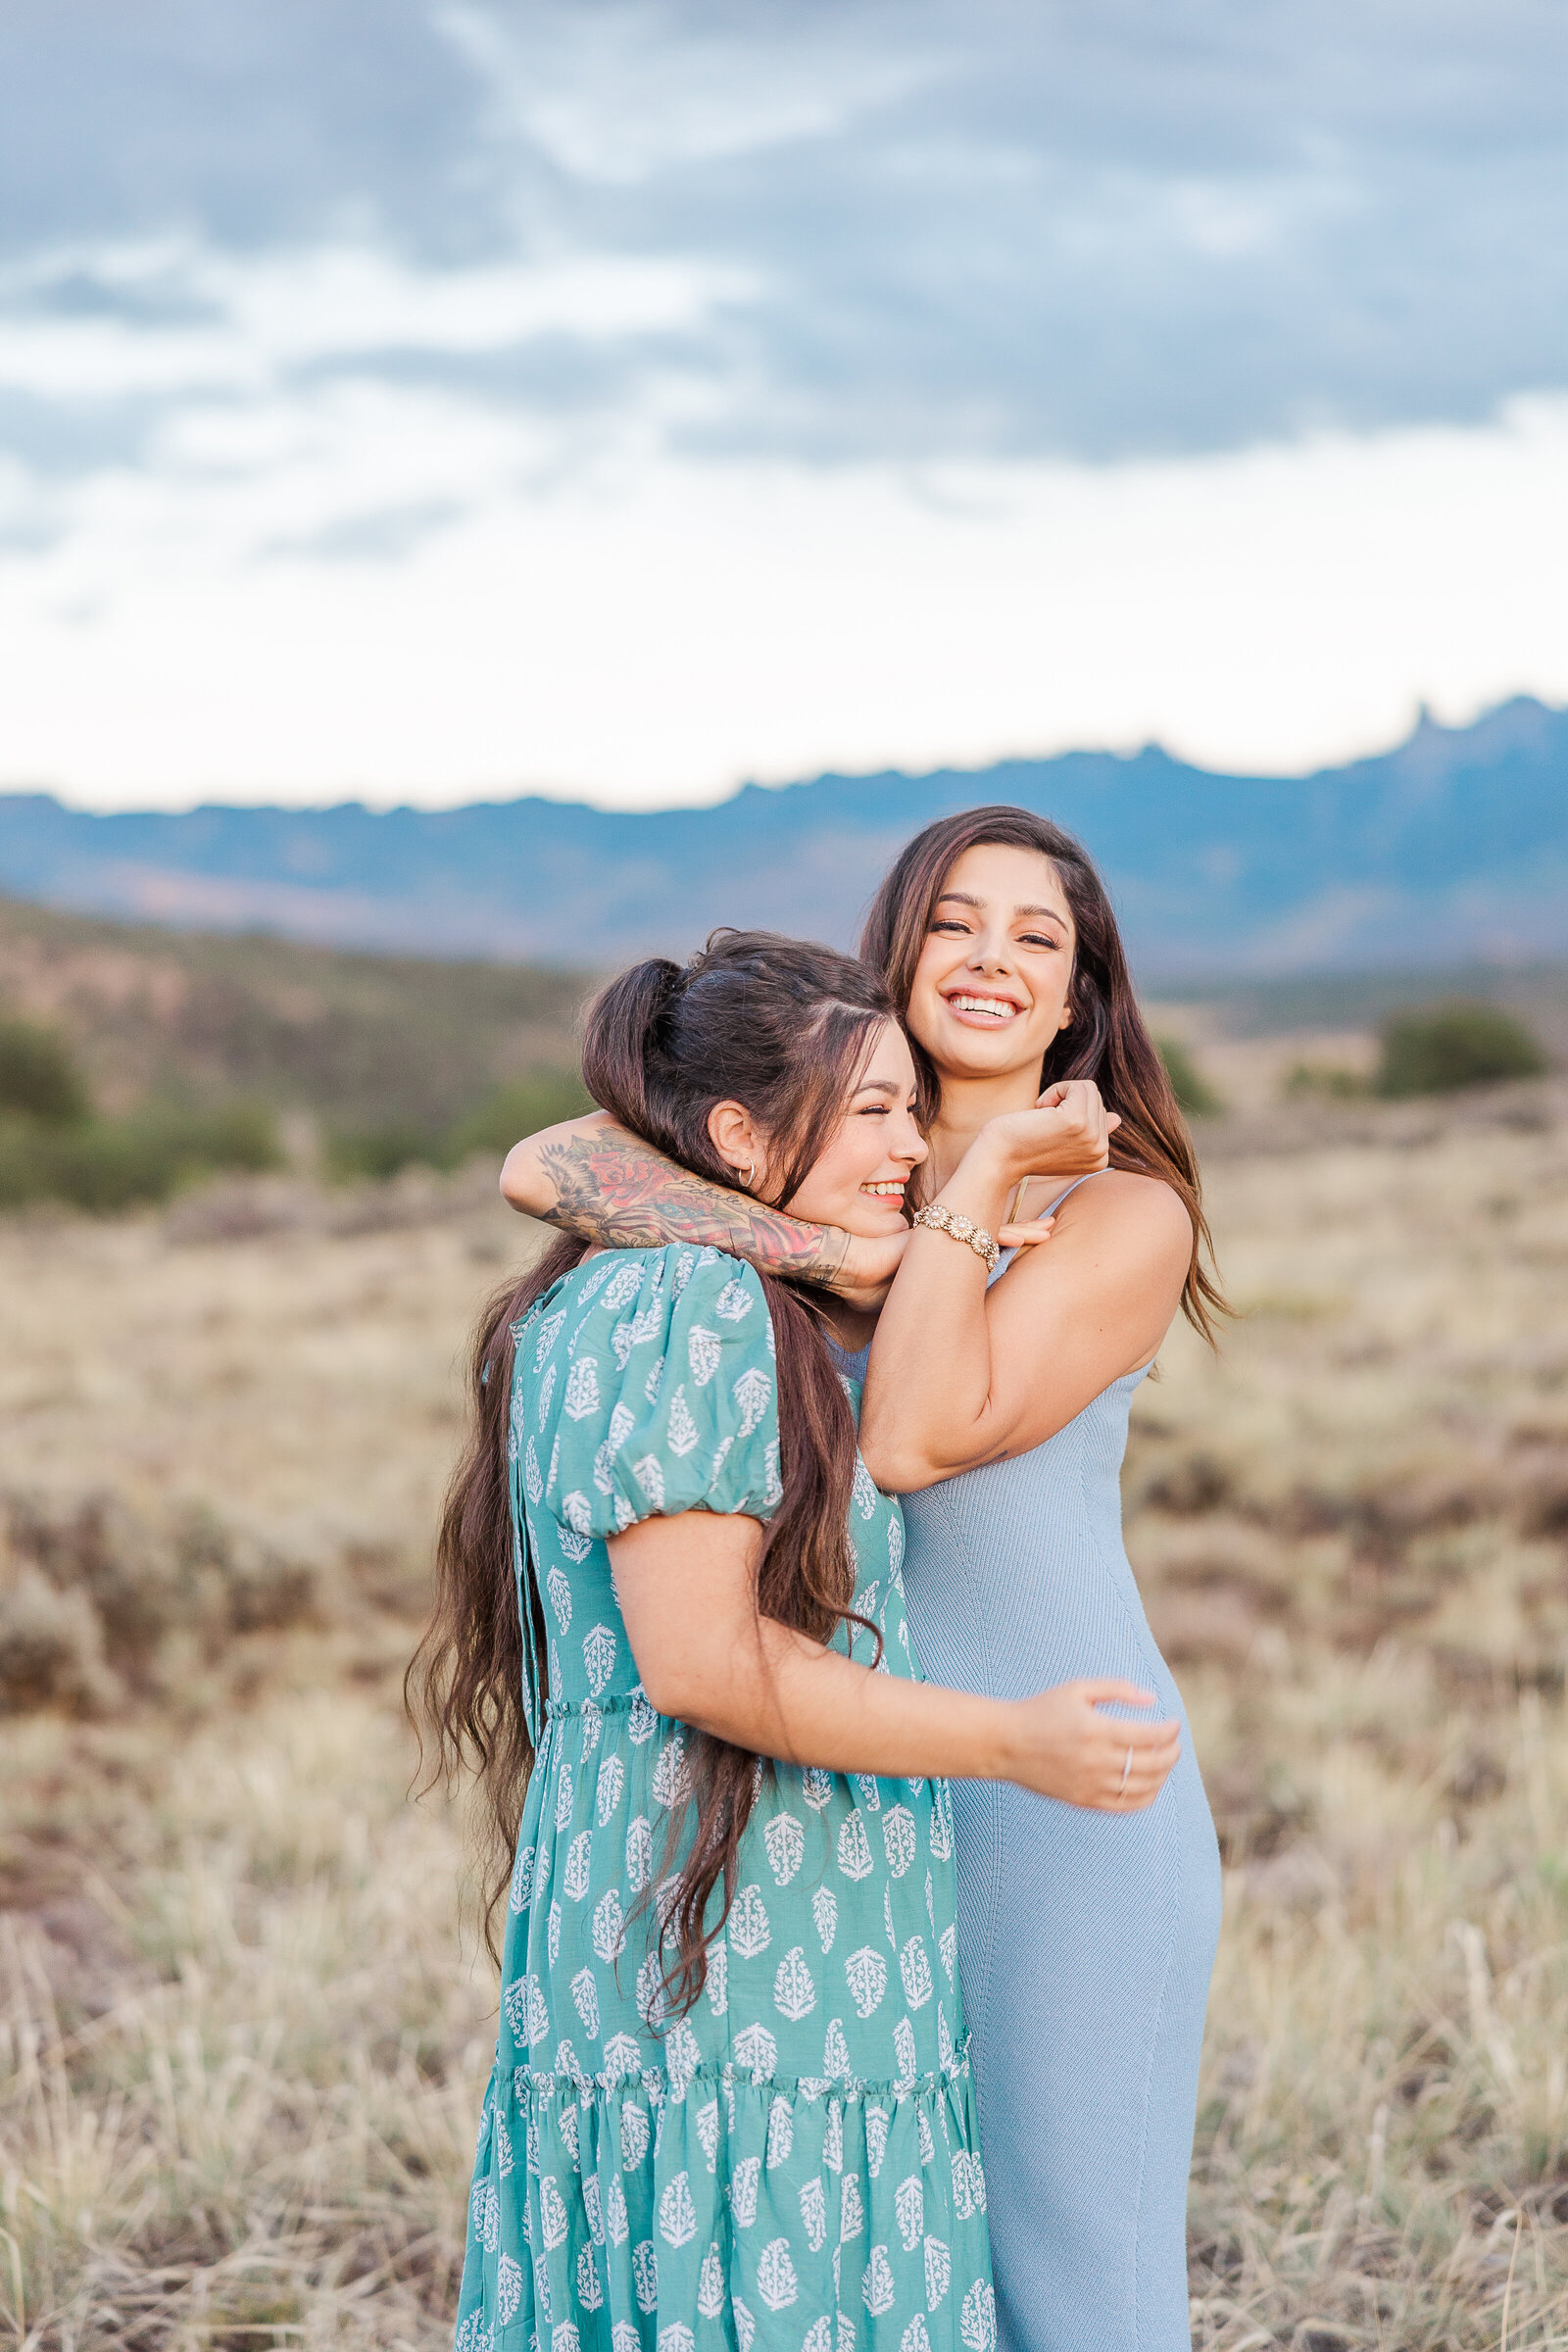 sister puts younger sister in a headlock as a joke for photo